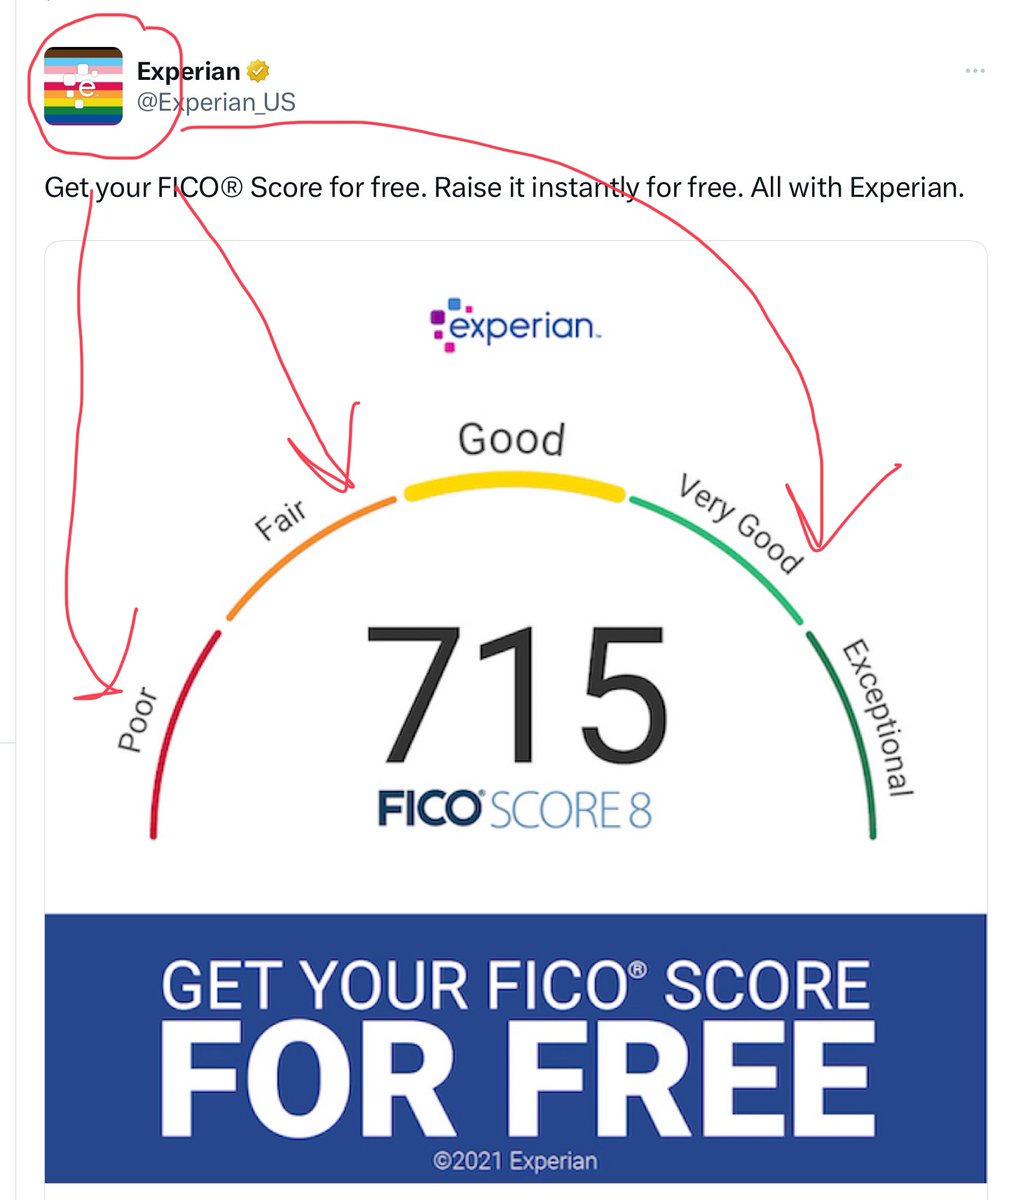 Experian is doing the flag thing, but something is wrong with color scheme.